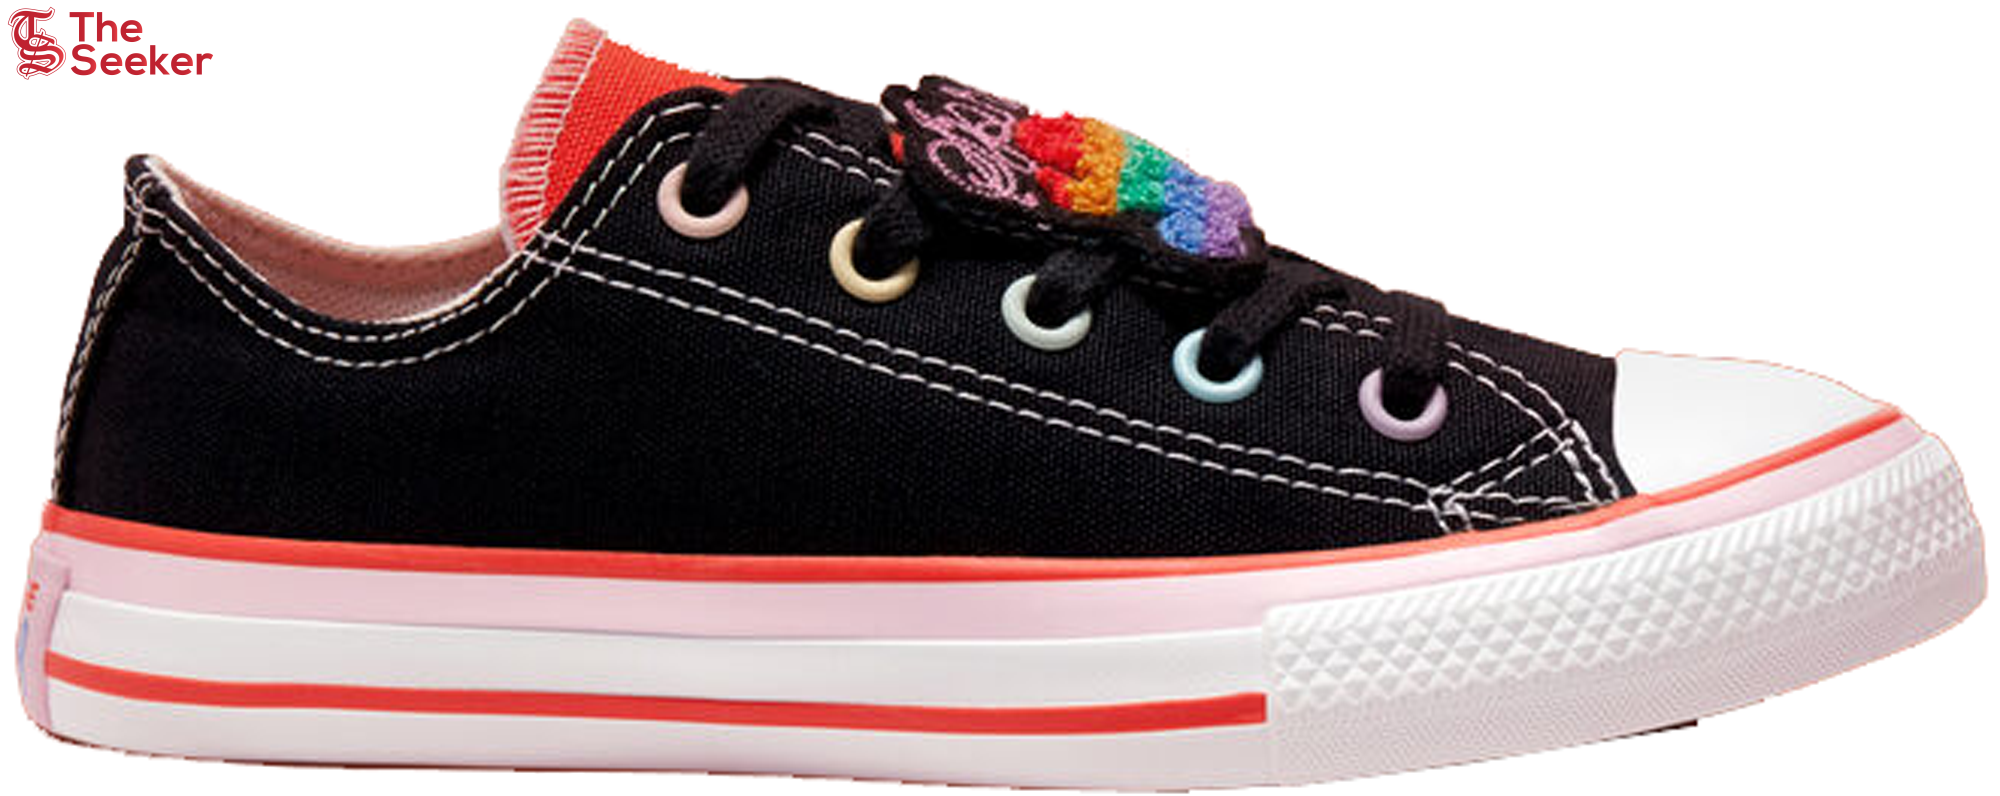 Converse Chuck Taylor All Star Ox Millie Bobby Brown (PS)